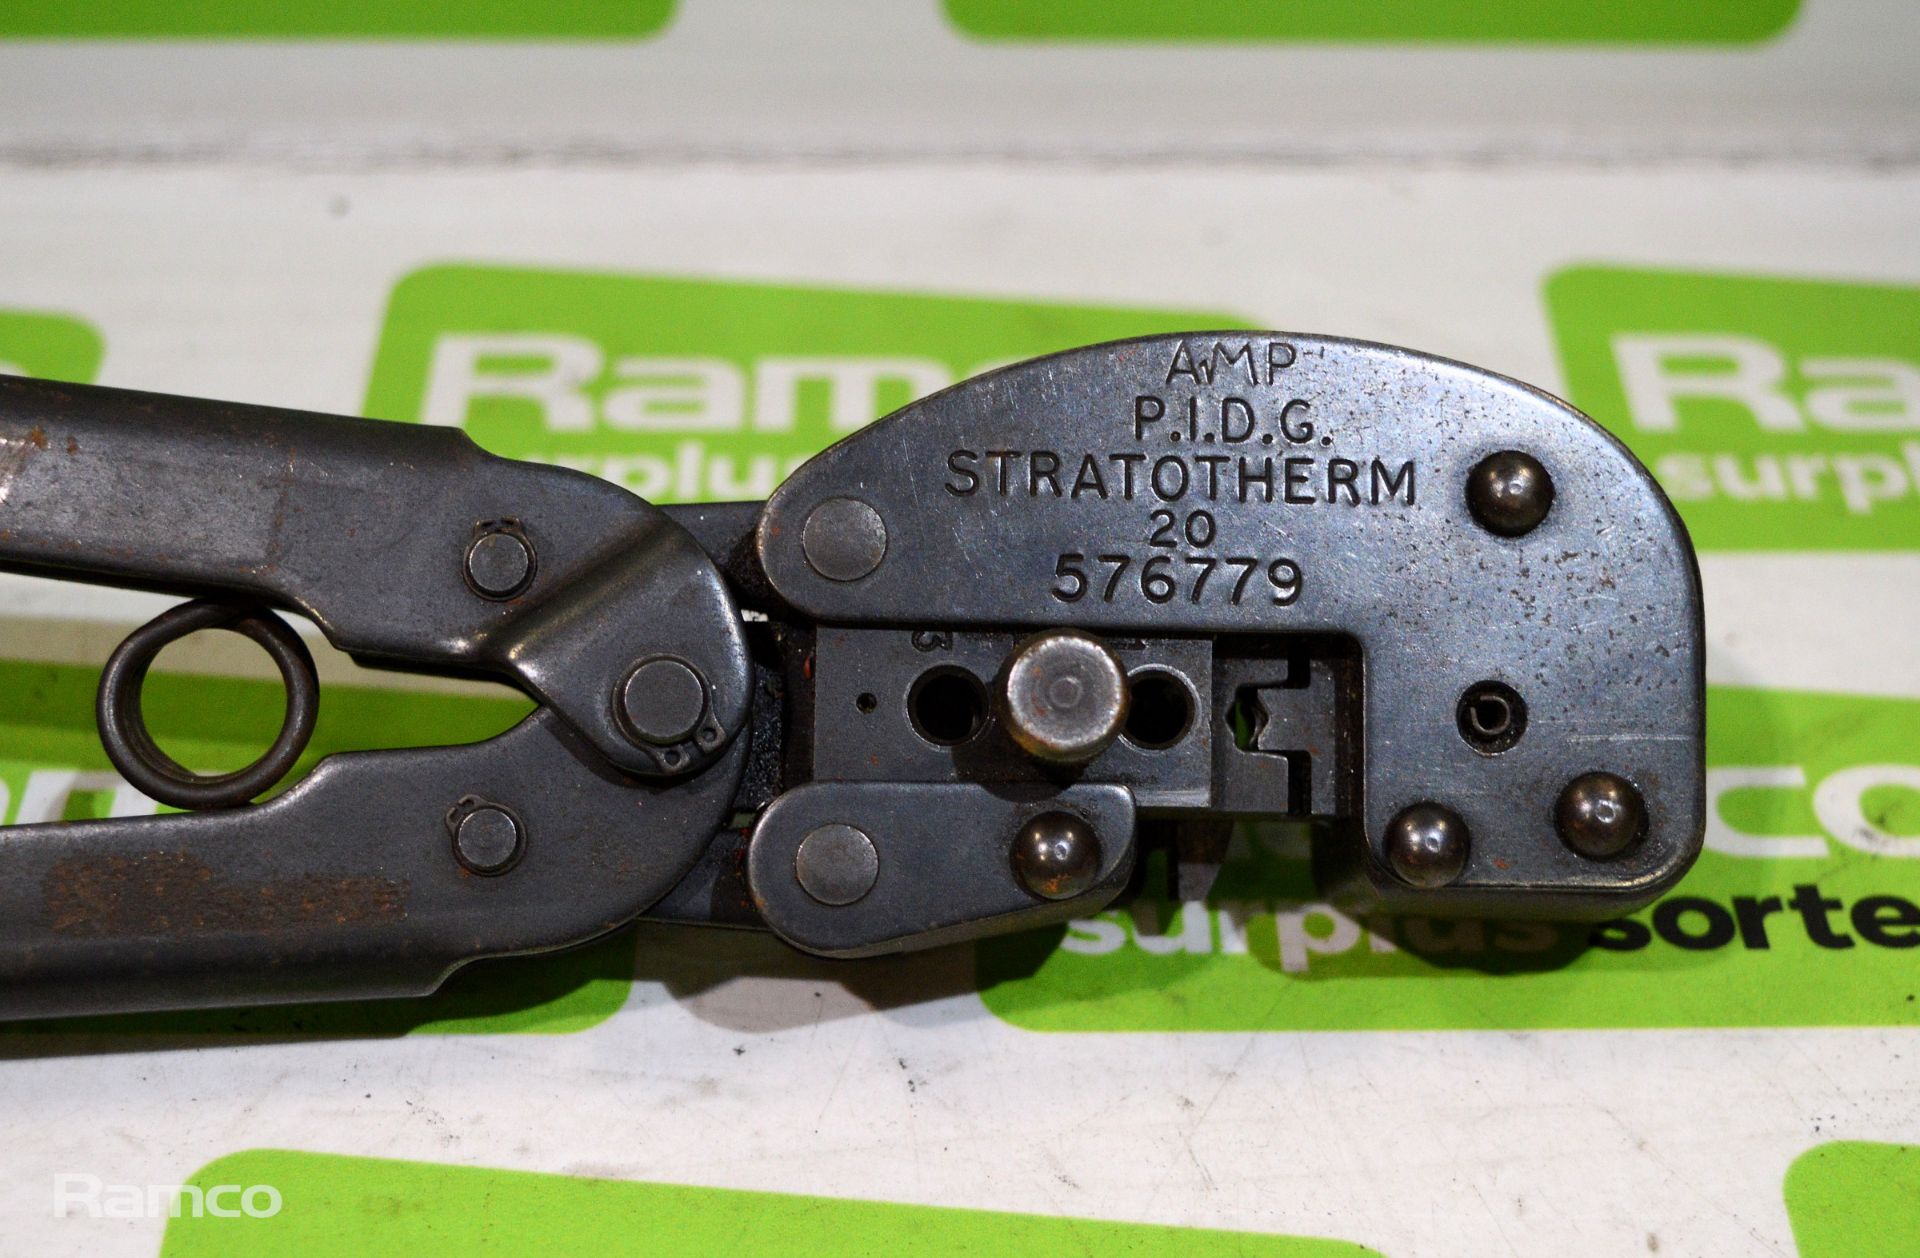 2x Stratotherm 20 Hand Crimping Tools - Image 2 of 3